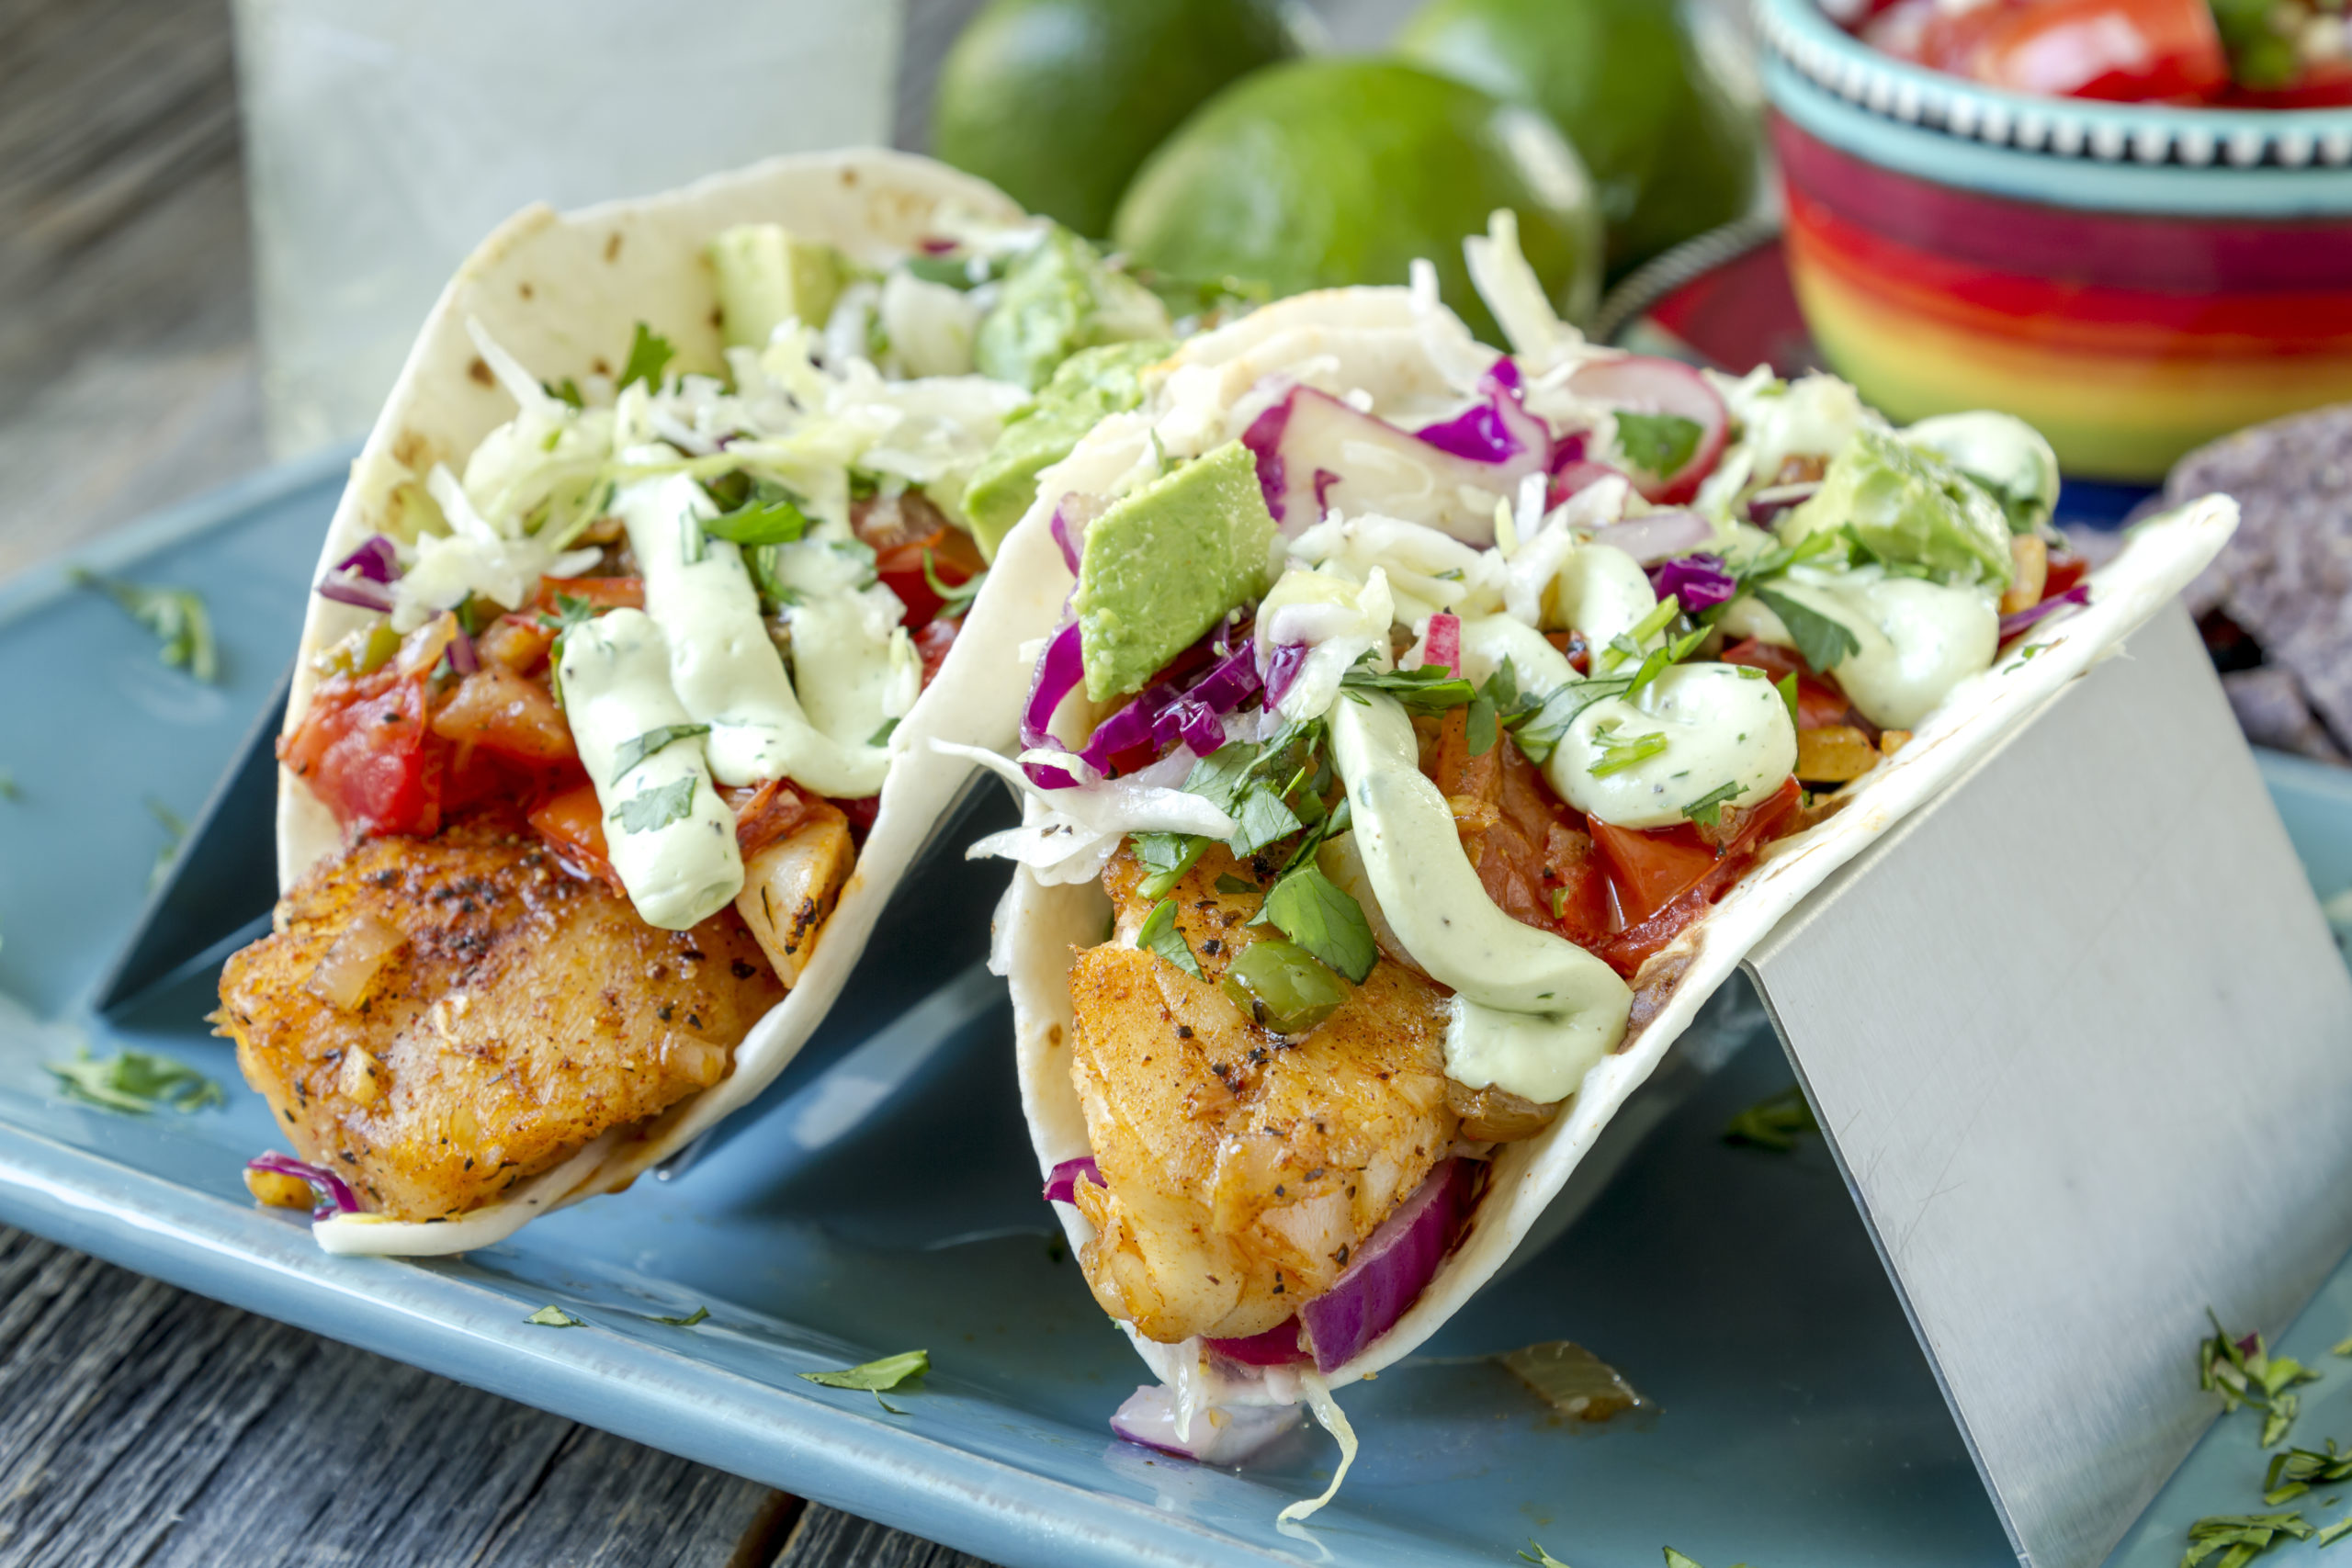 https://thesweetpotato.ca/wp-content/uploads/2019/01/Fish-Tacos-with-Green-Sauce-scaled.jpg